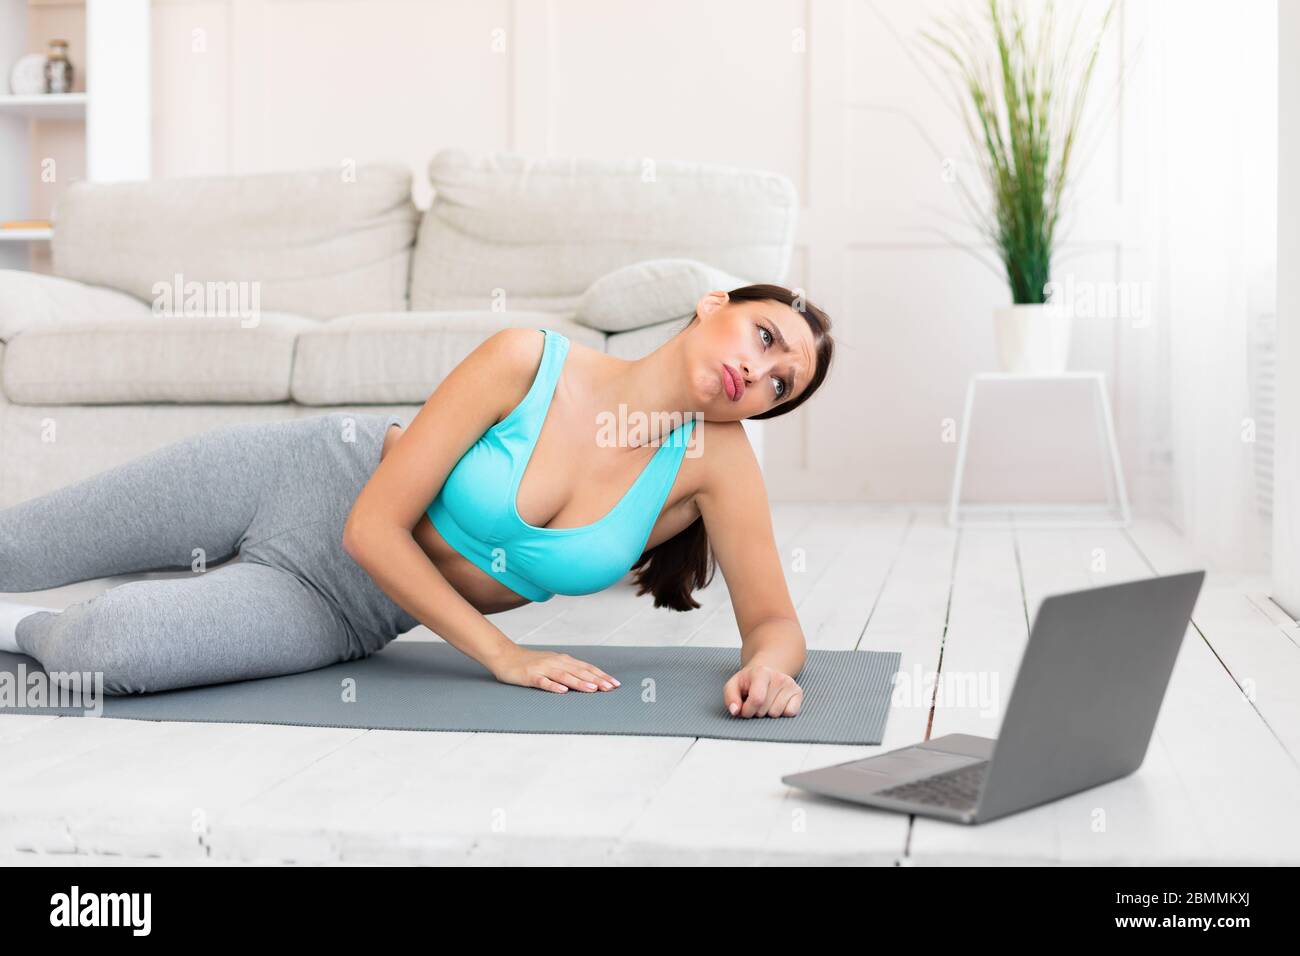 Tired Girl Doing Online Fitness Workout Staying At Home Stock Photo